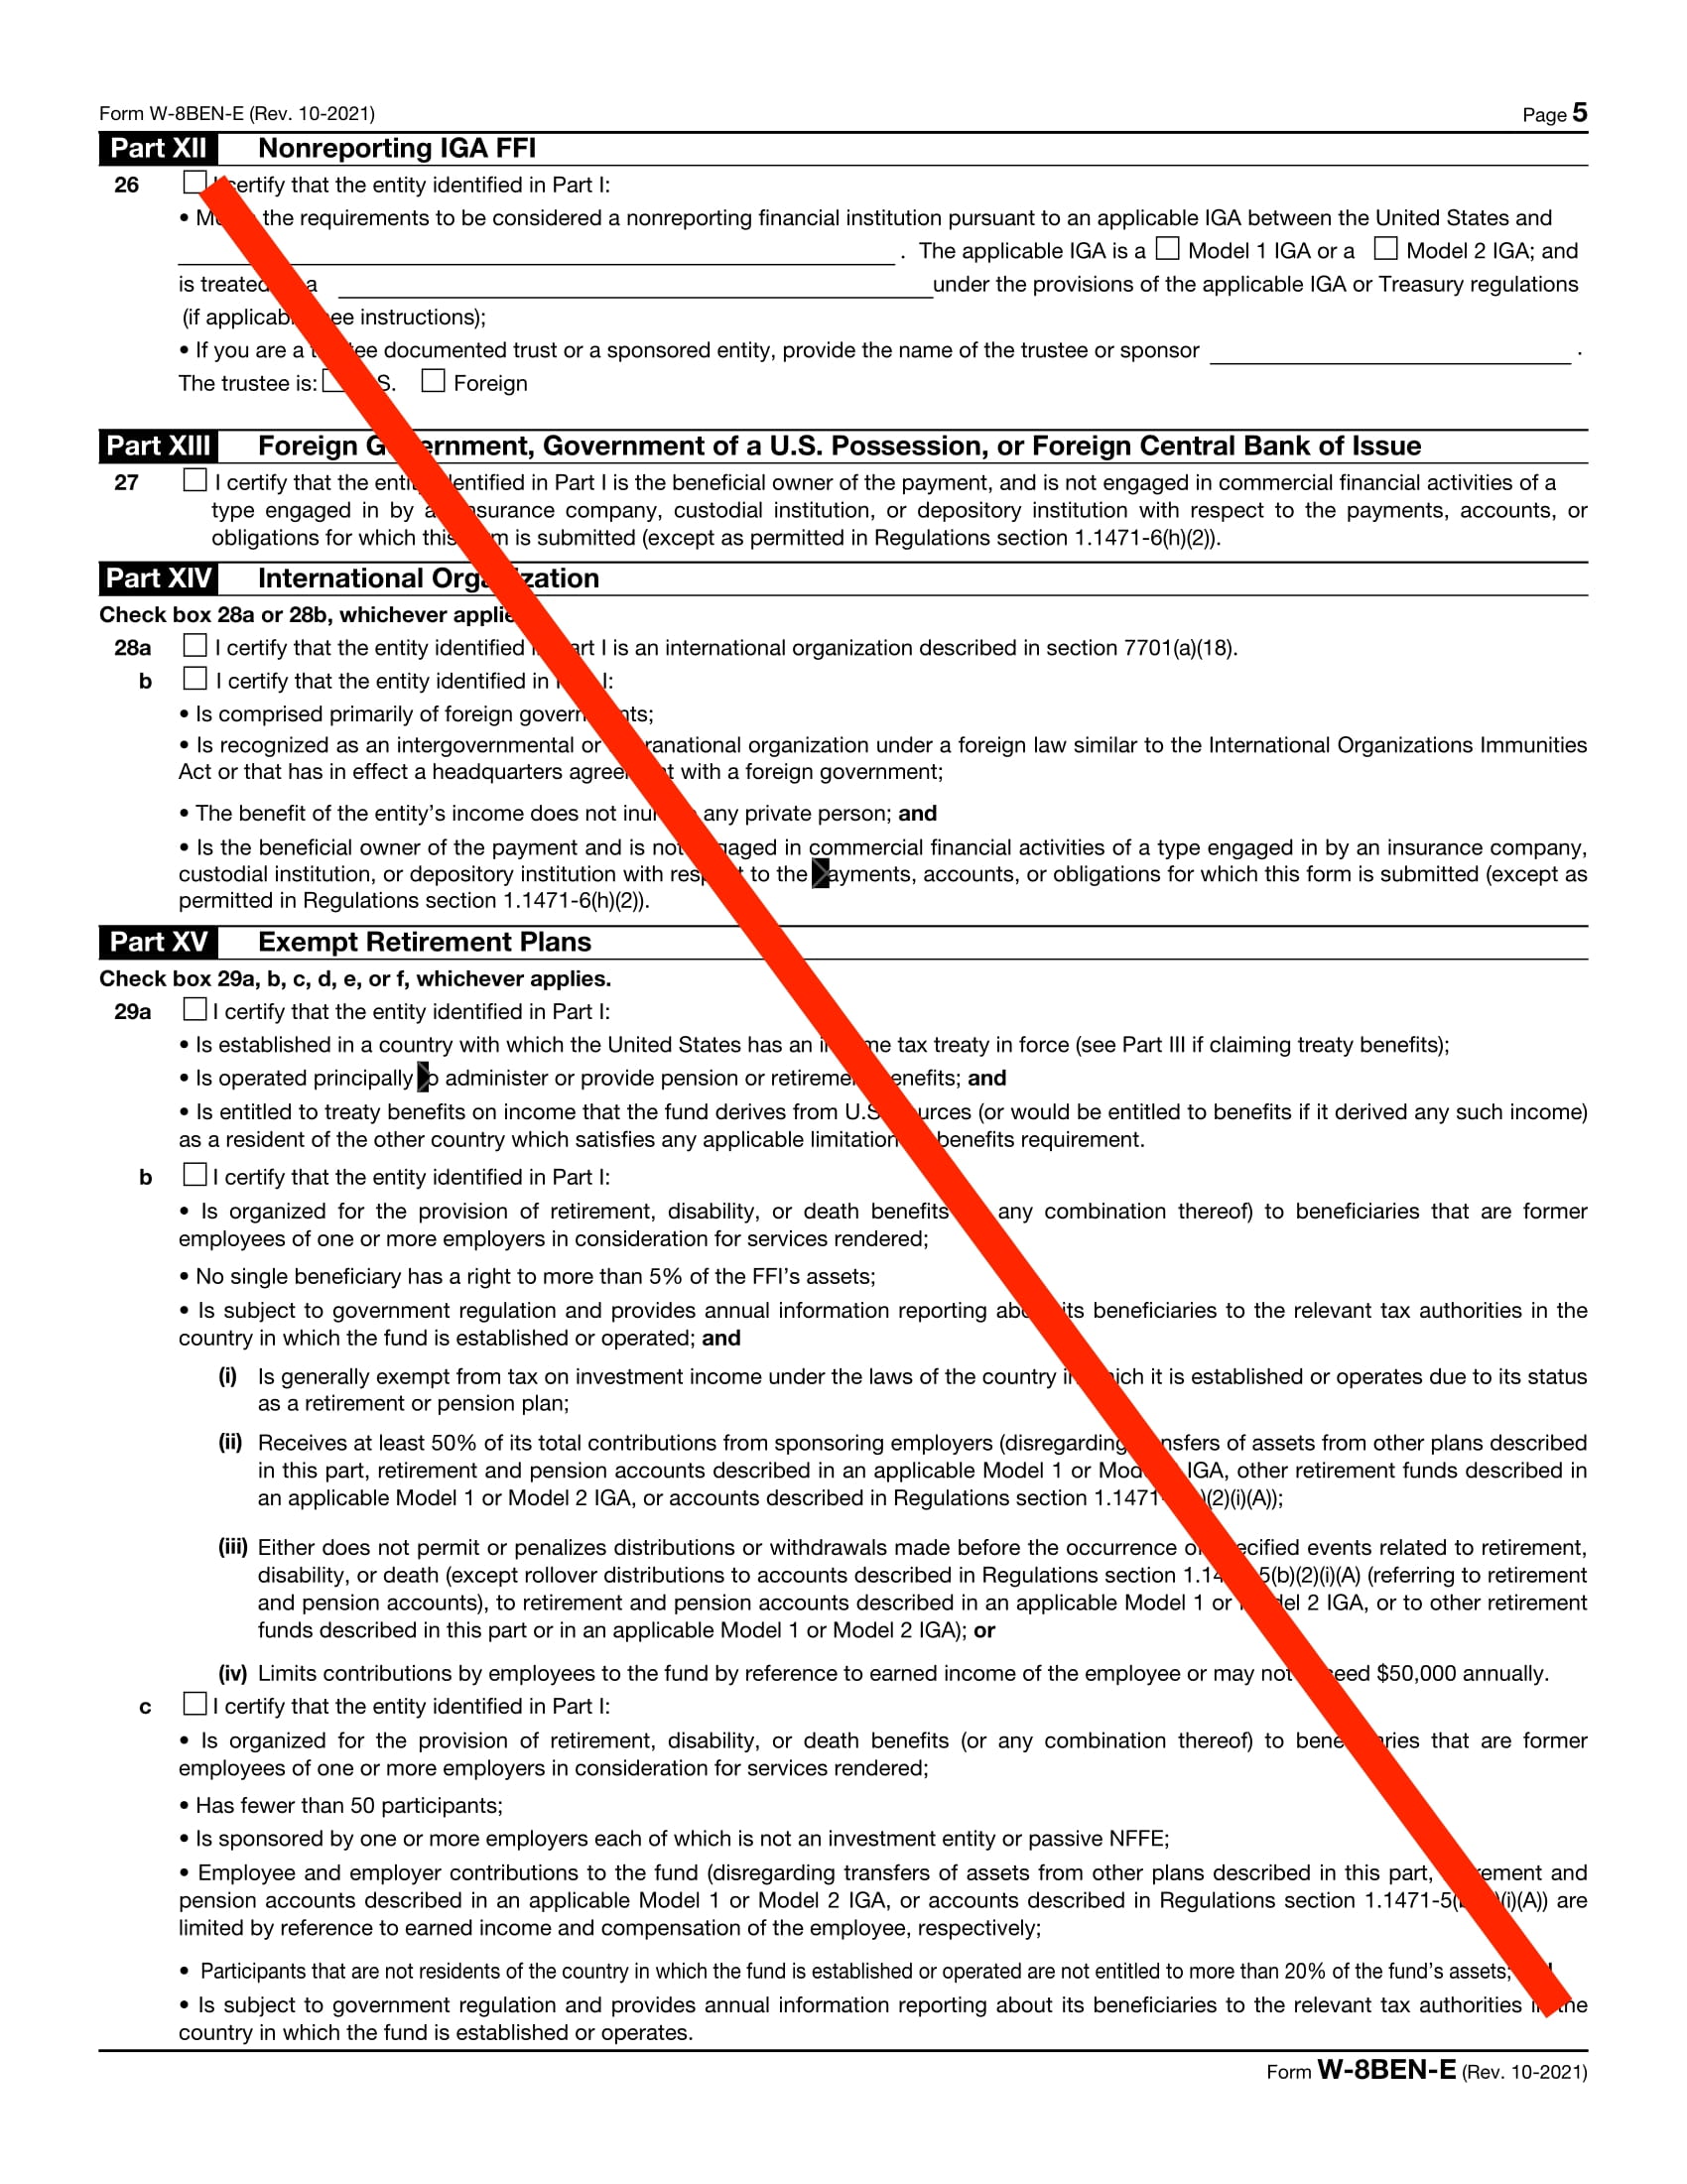 How do I fill out Form W-8BEN-E? (Page 5)